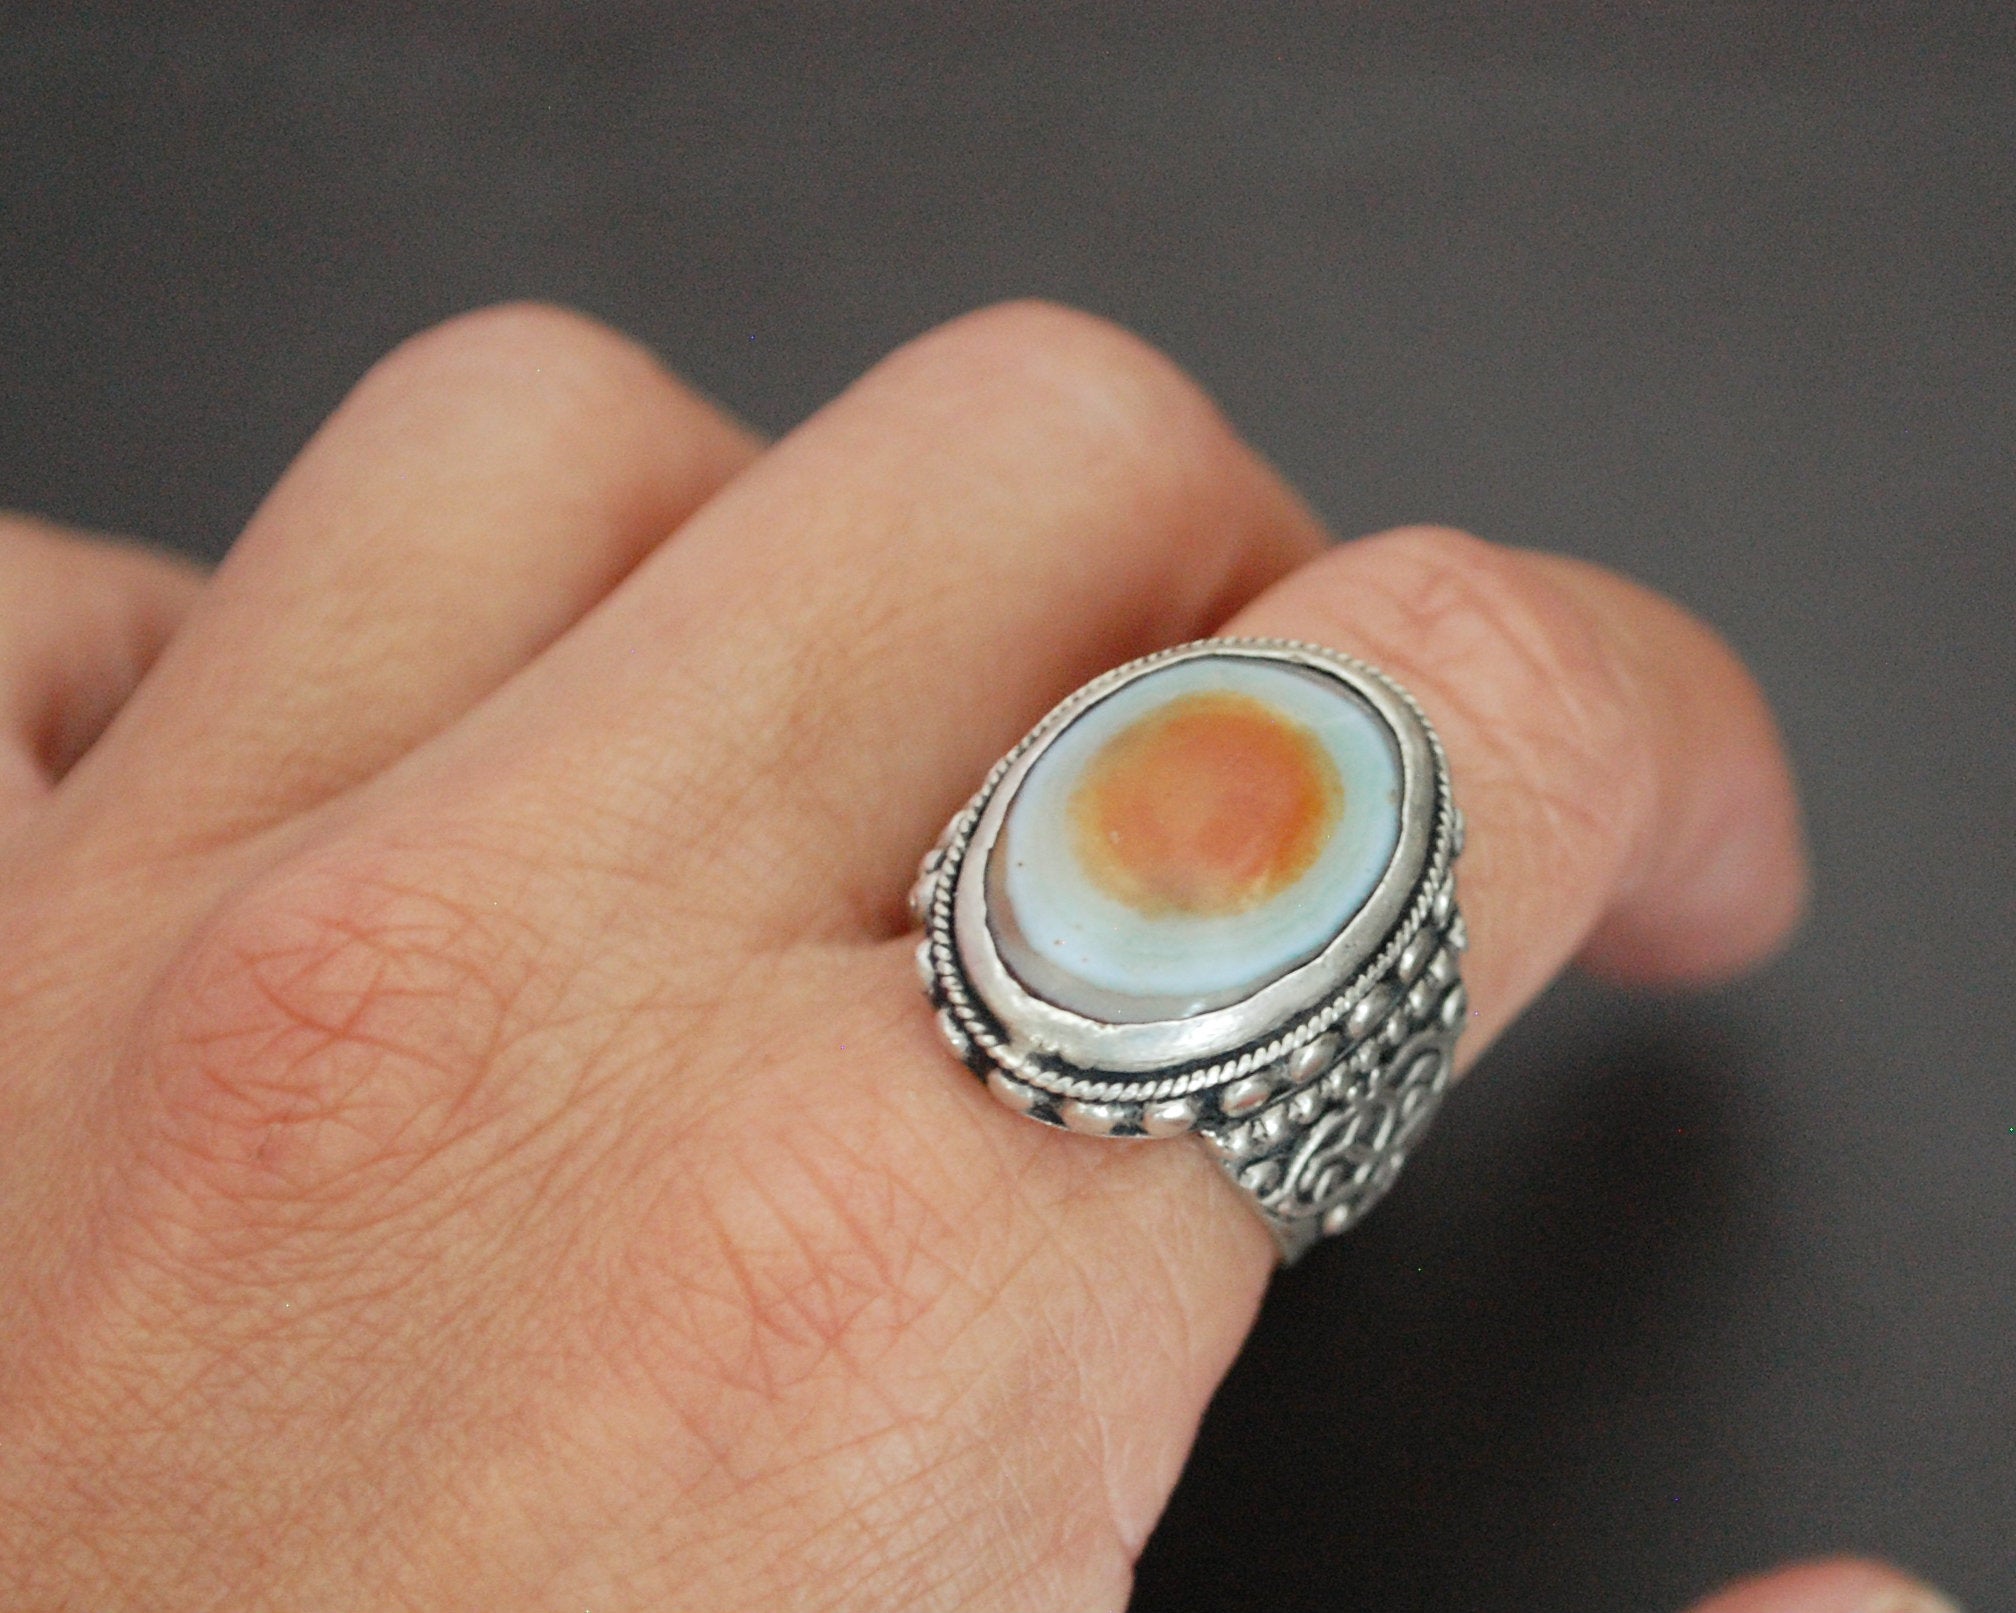 Old Eye Agate Ring - Size 8.5